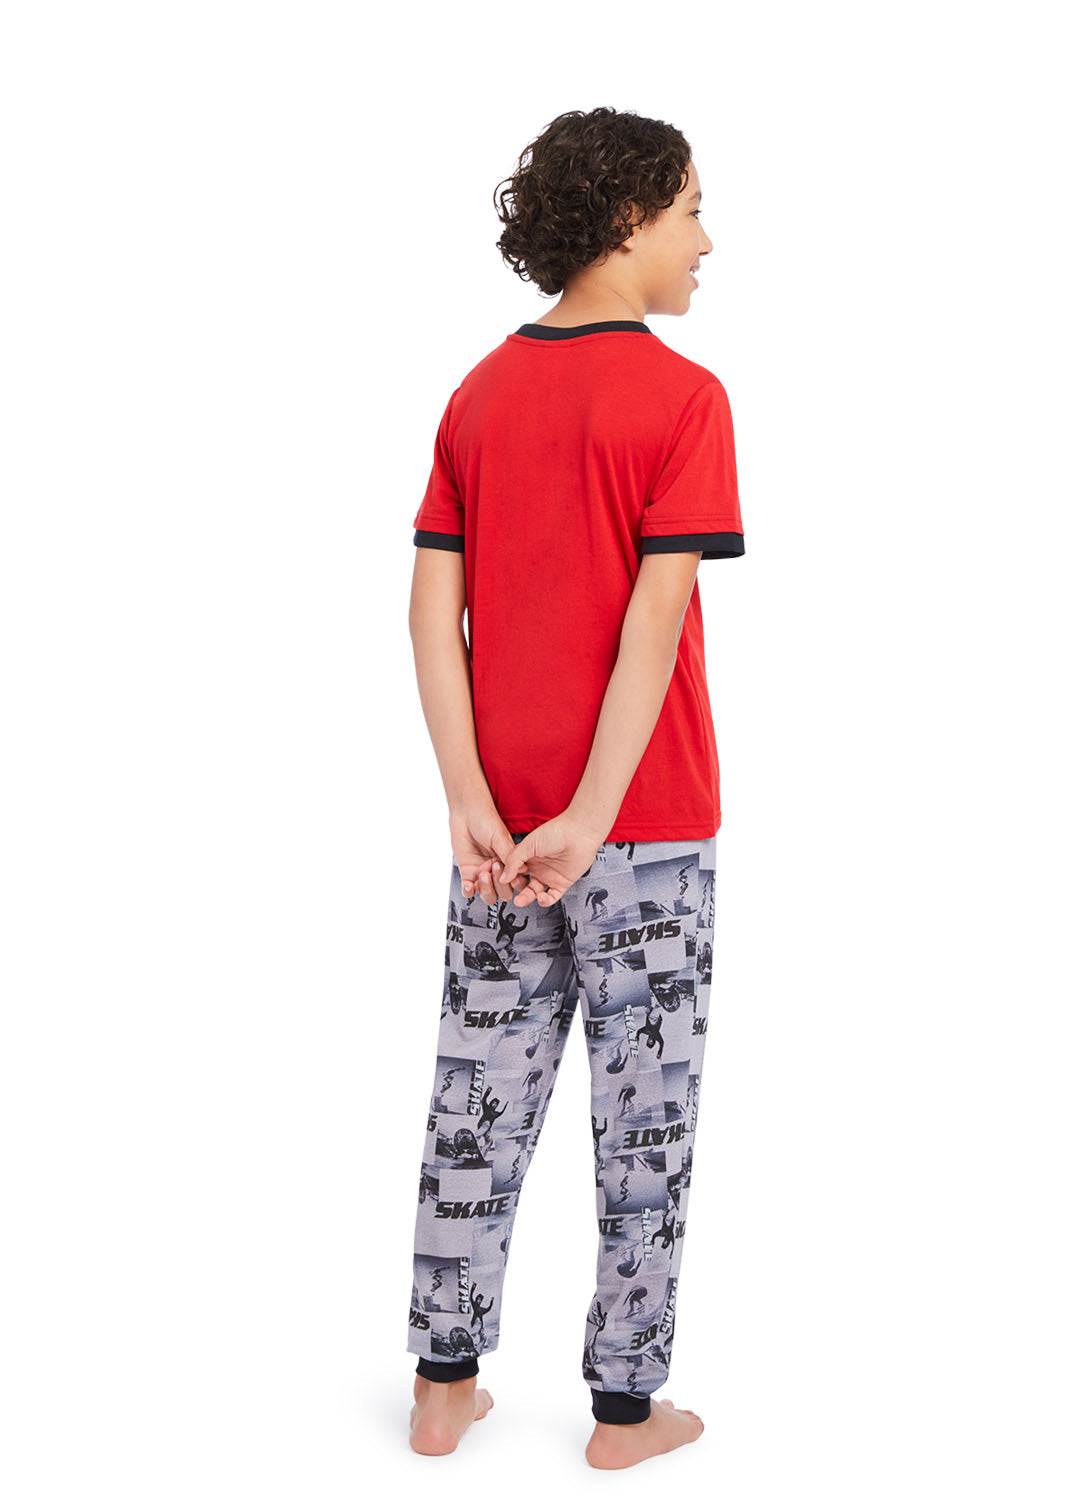 Back view Boy wearing Pj set Skater, t-shirt (red) with print and pants (gray) with print